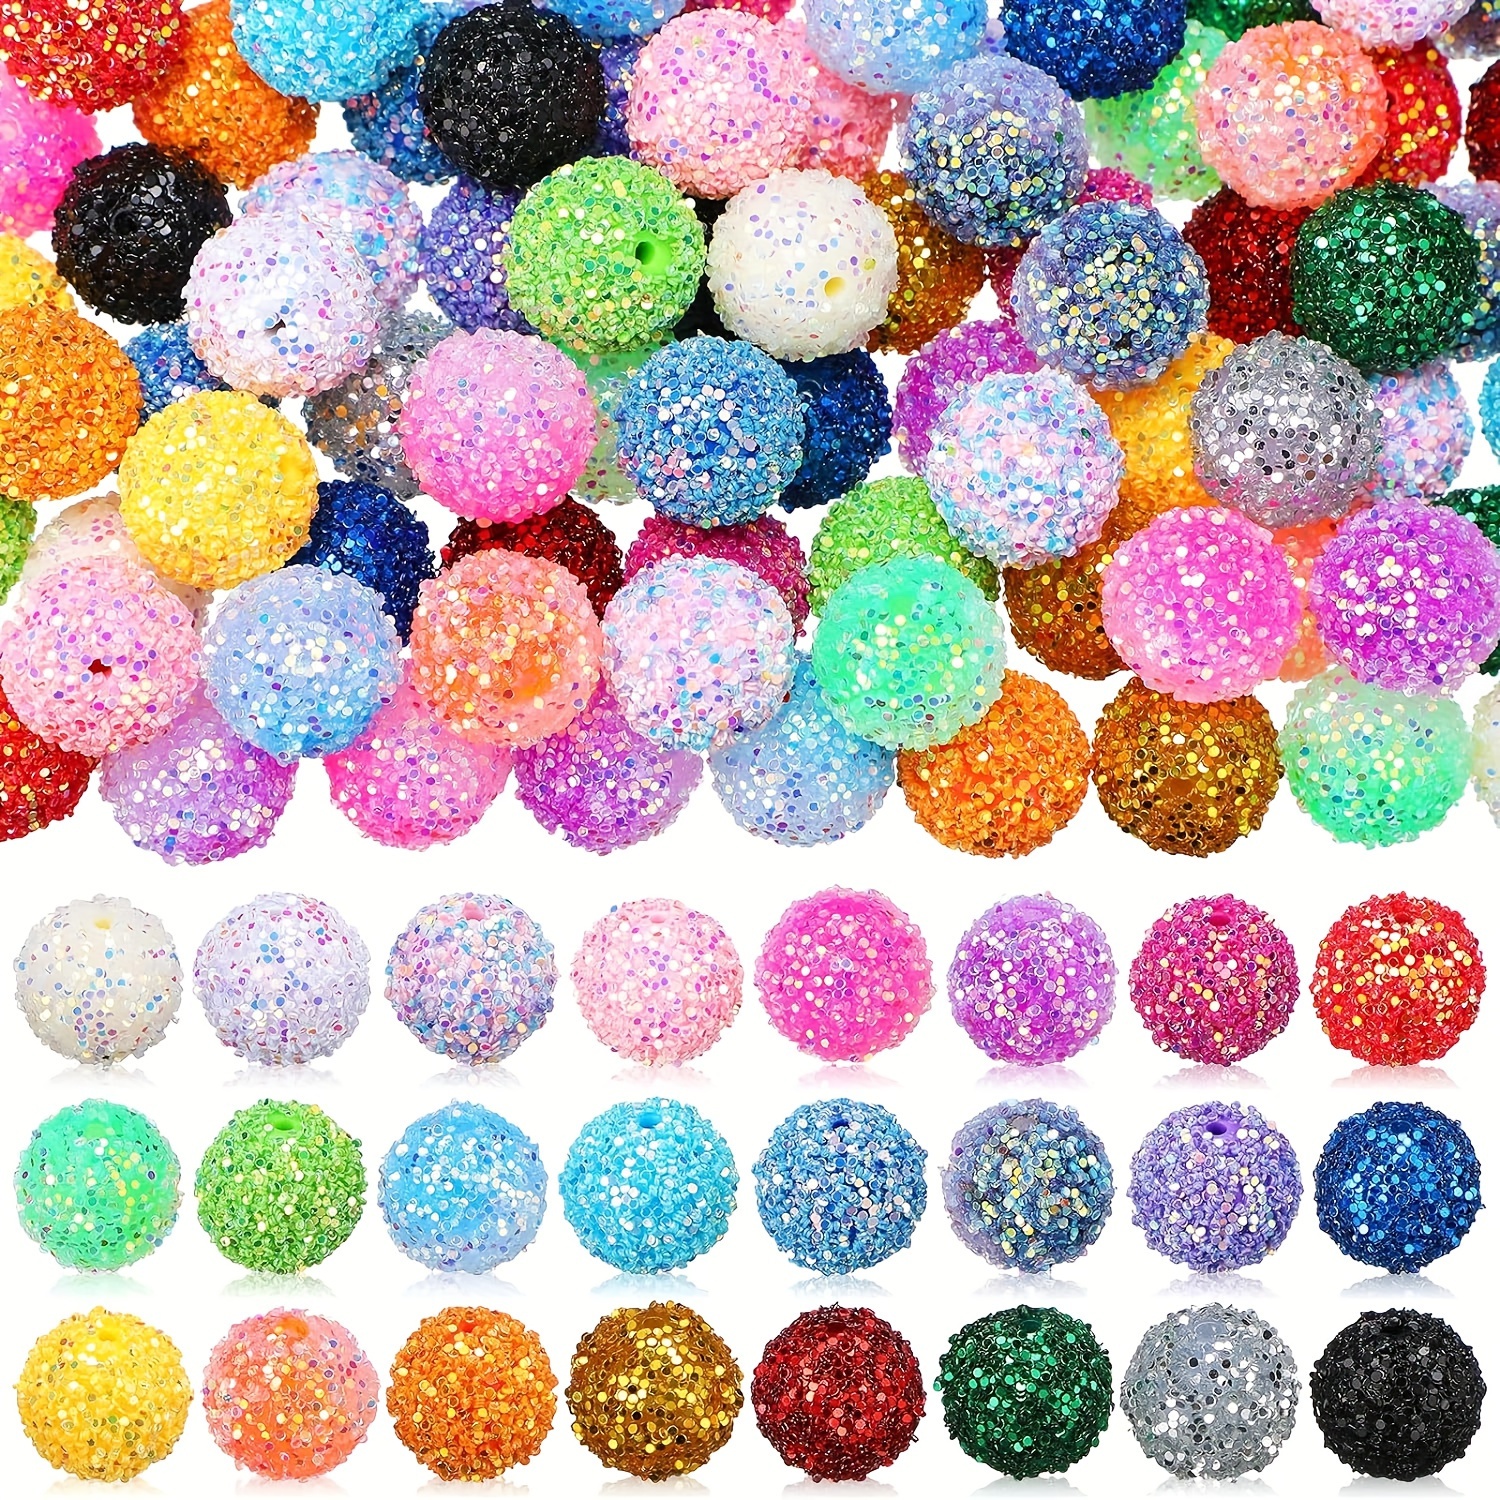 

20 Pcs 20mm Chunk Bubblegum Beads - Multicolored Rhinestone Beads For Diy Jewelry, Crafts, And Pen Accessories